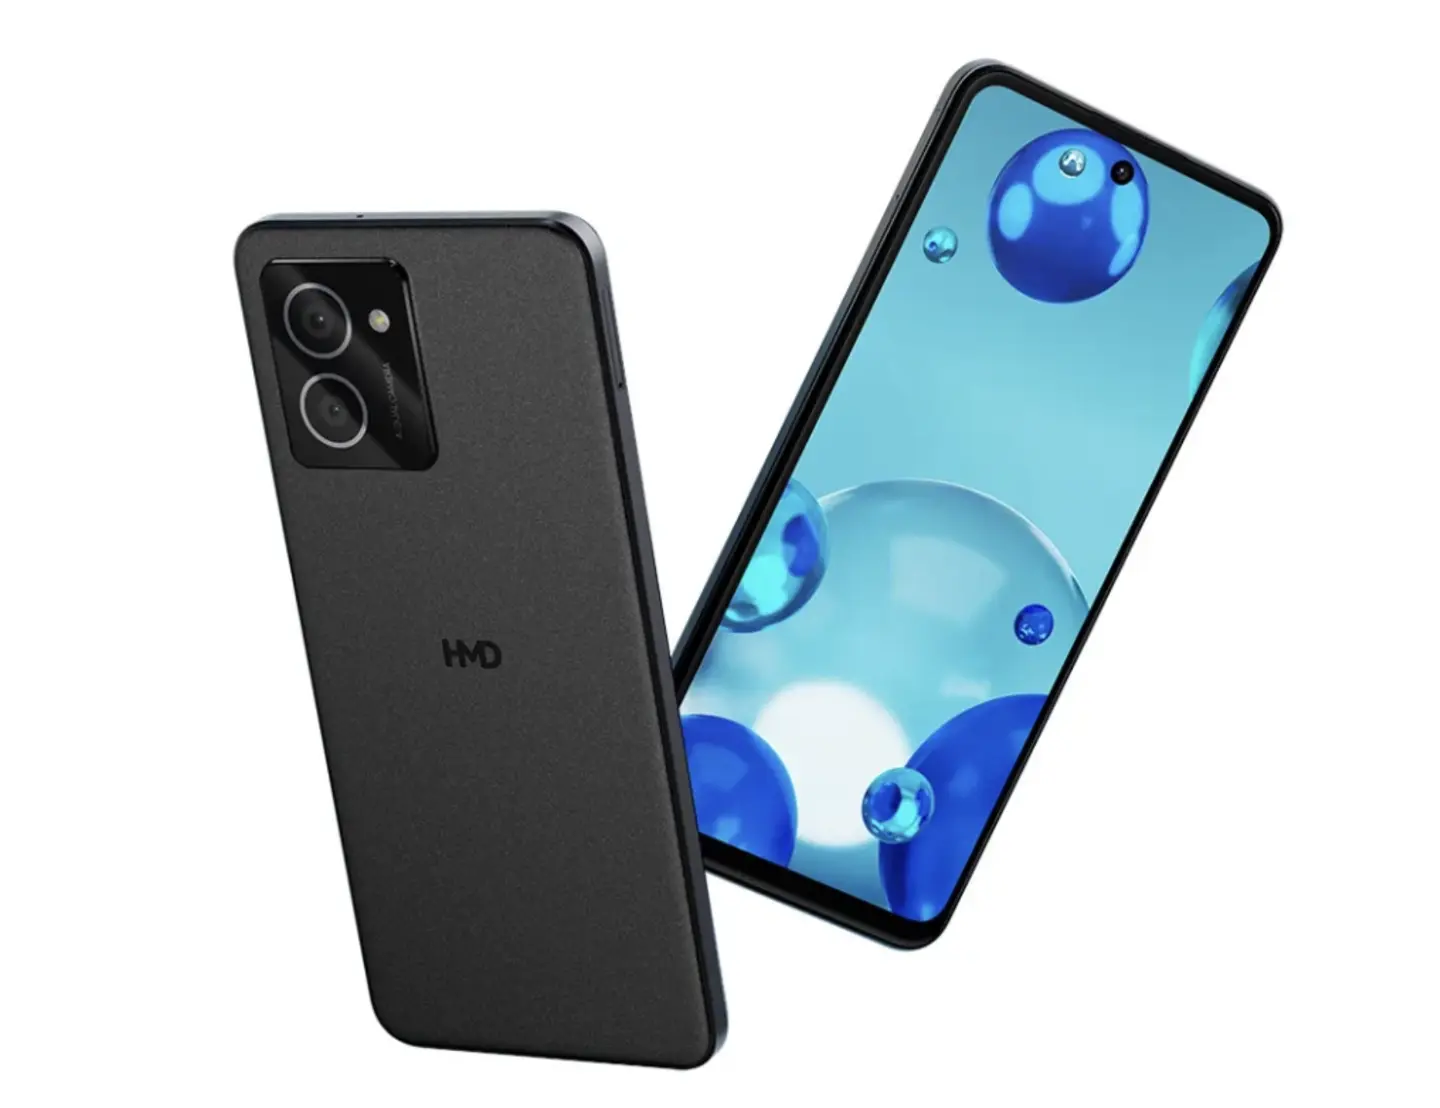 HMD Vibe First Look, Specifications & Price Surfaces Online